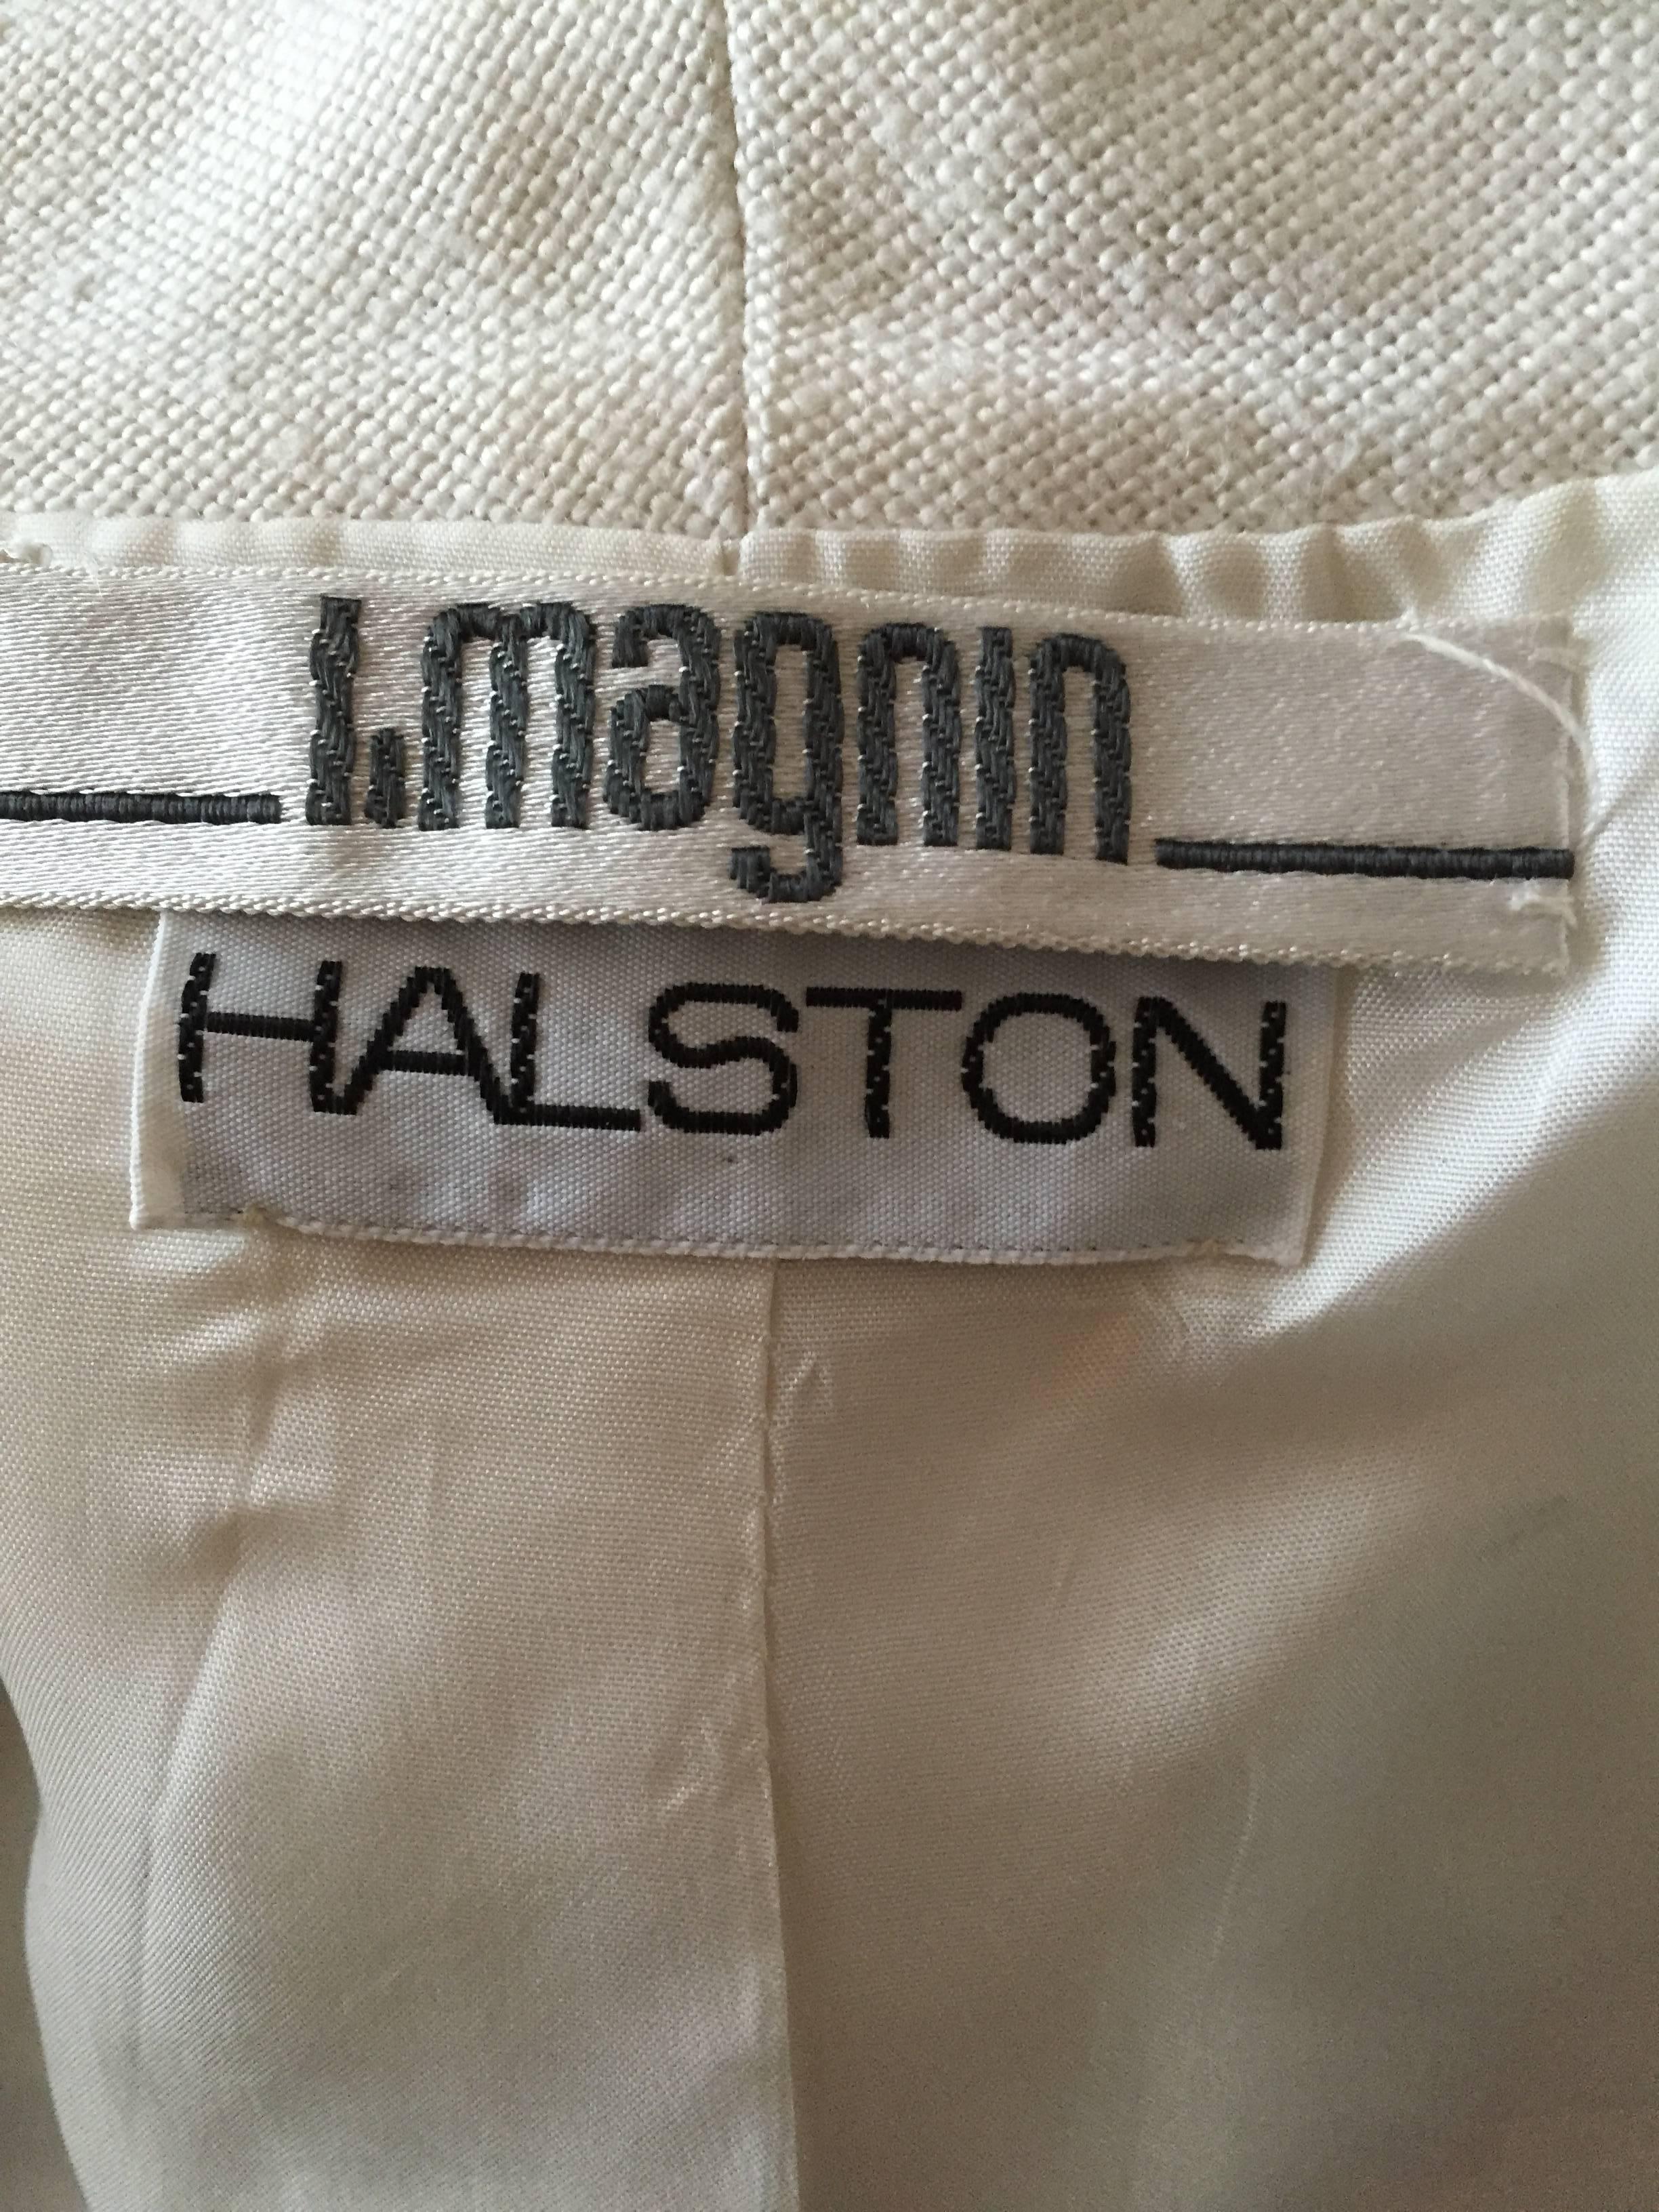 Halston 1970's Ivory Linen Skirt Suit from I.Magnin For Sale 1